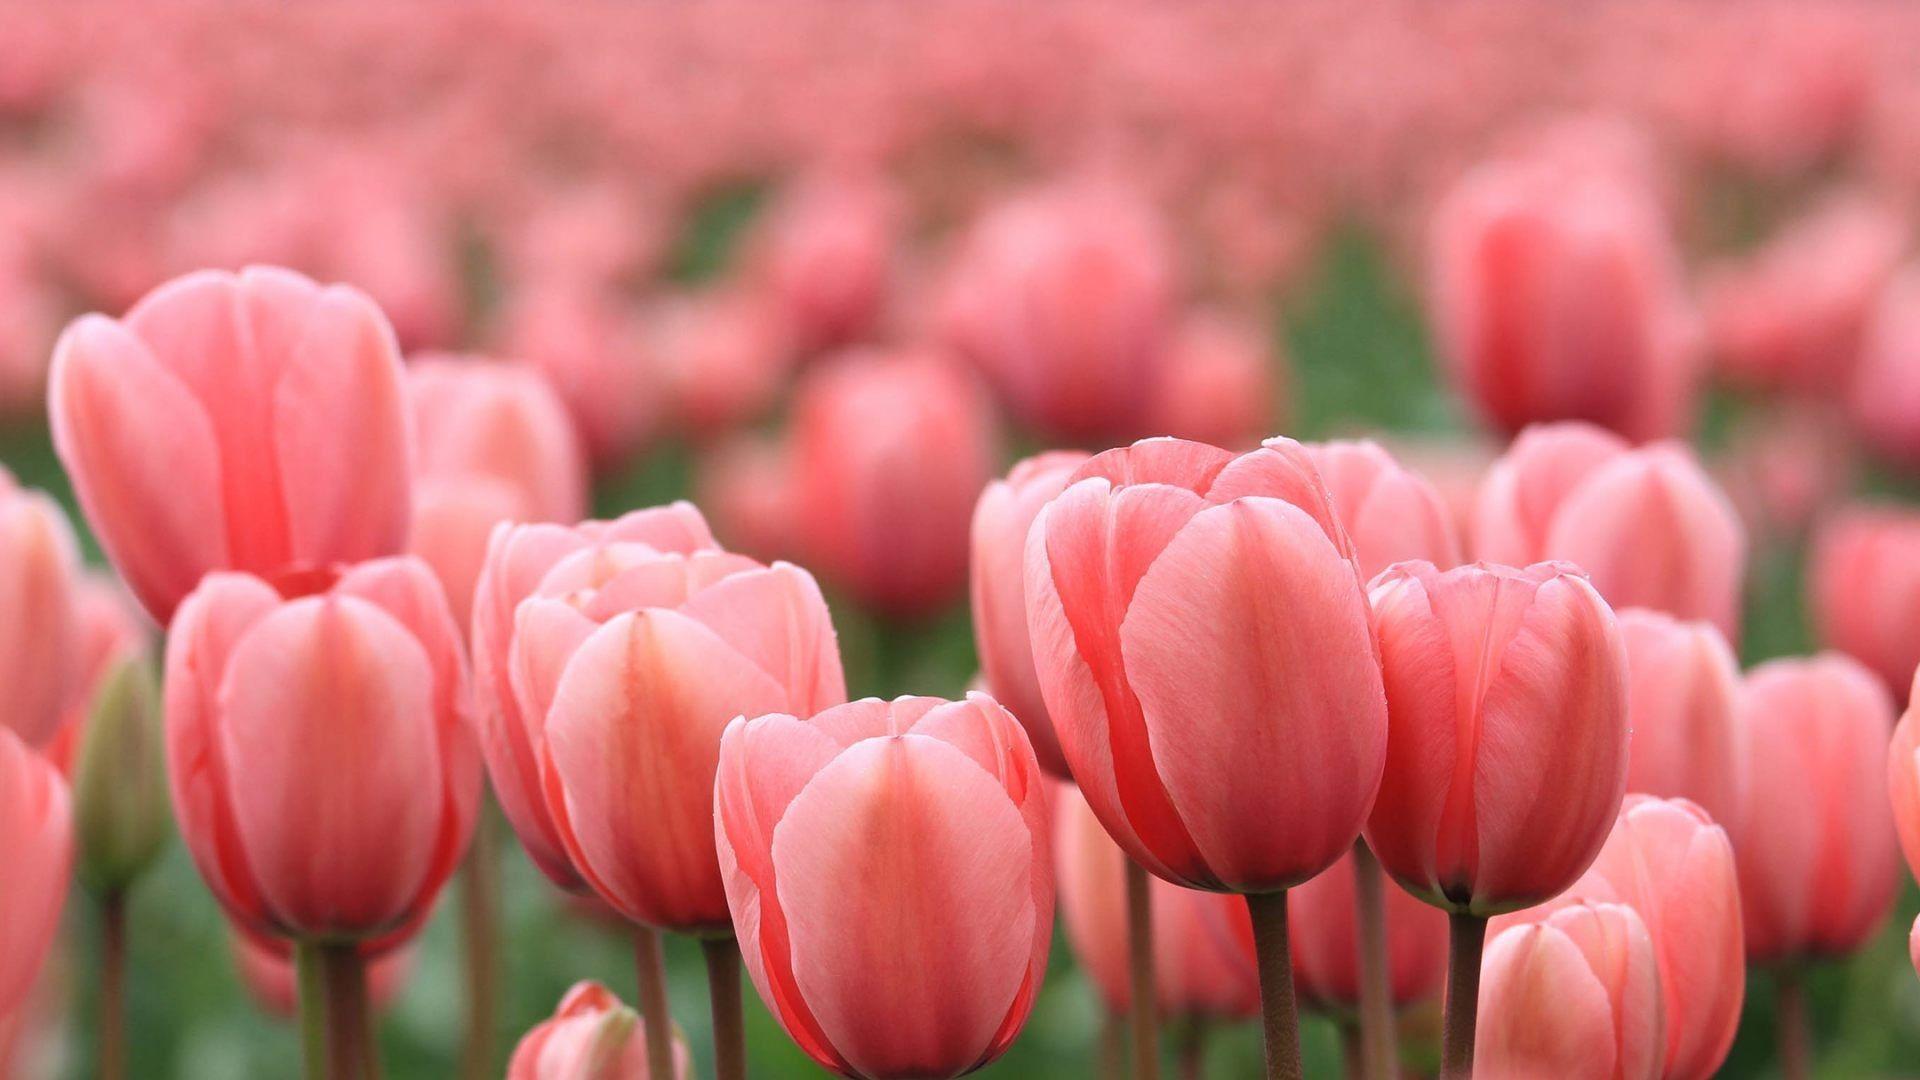 Wallpaper Pink Tulips in Bloom During Daytime Background  Download Free  Image